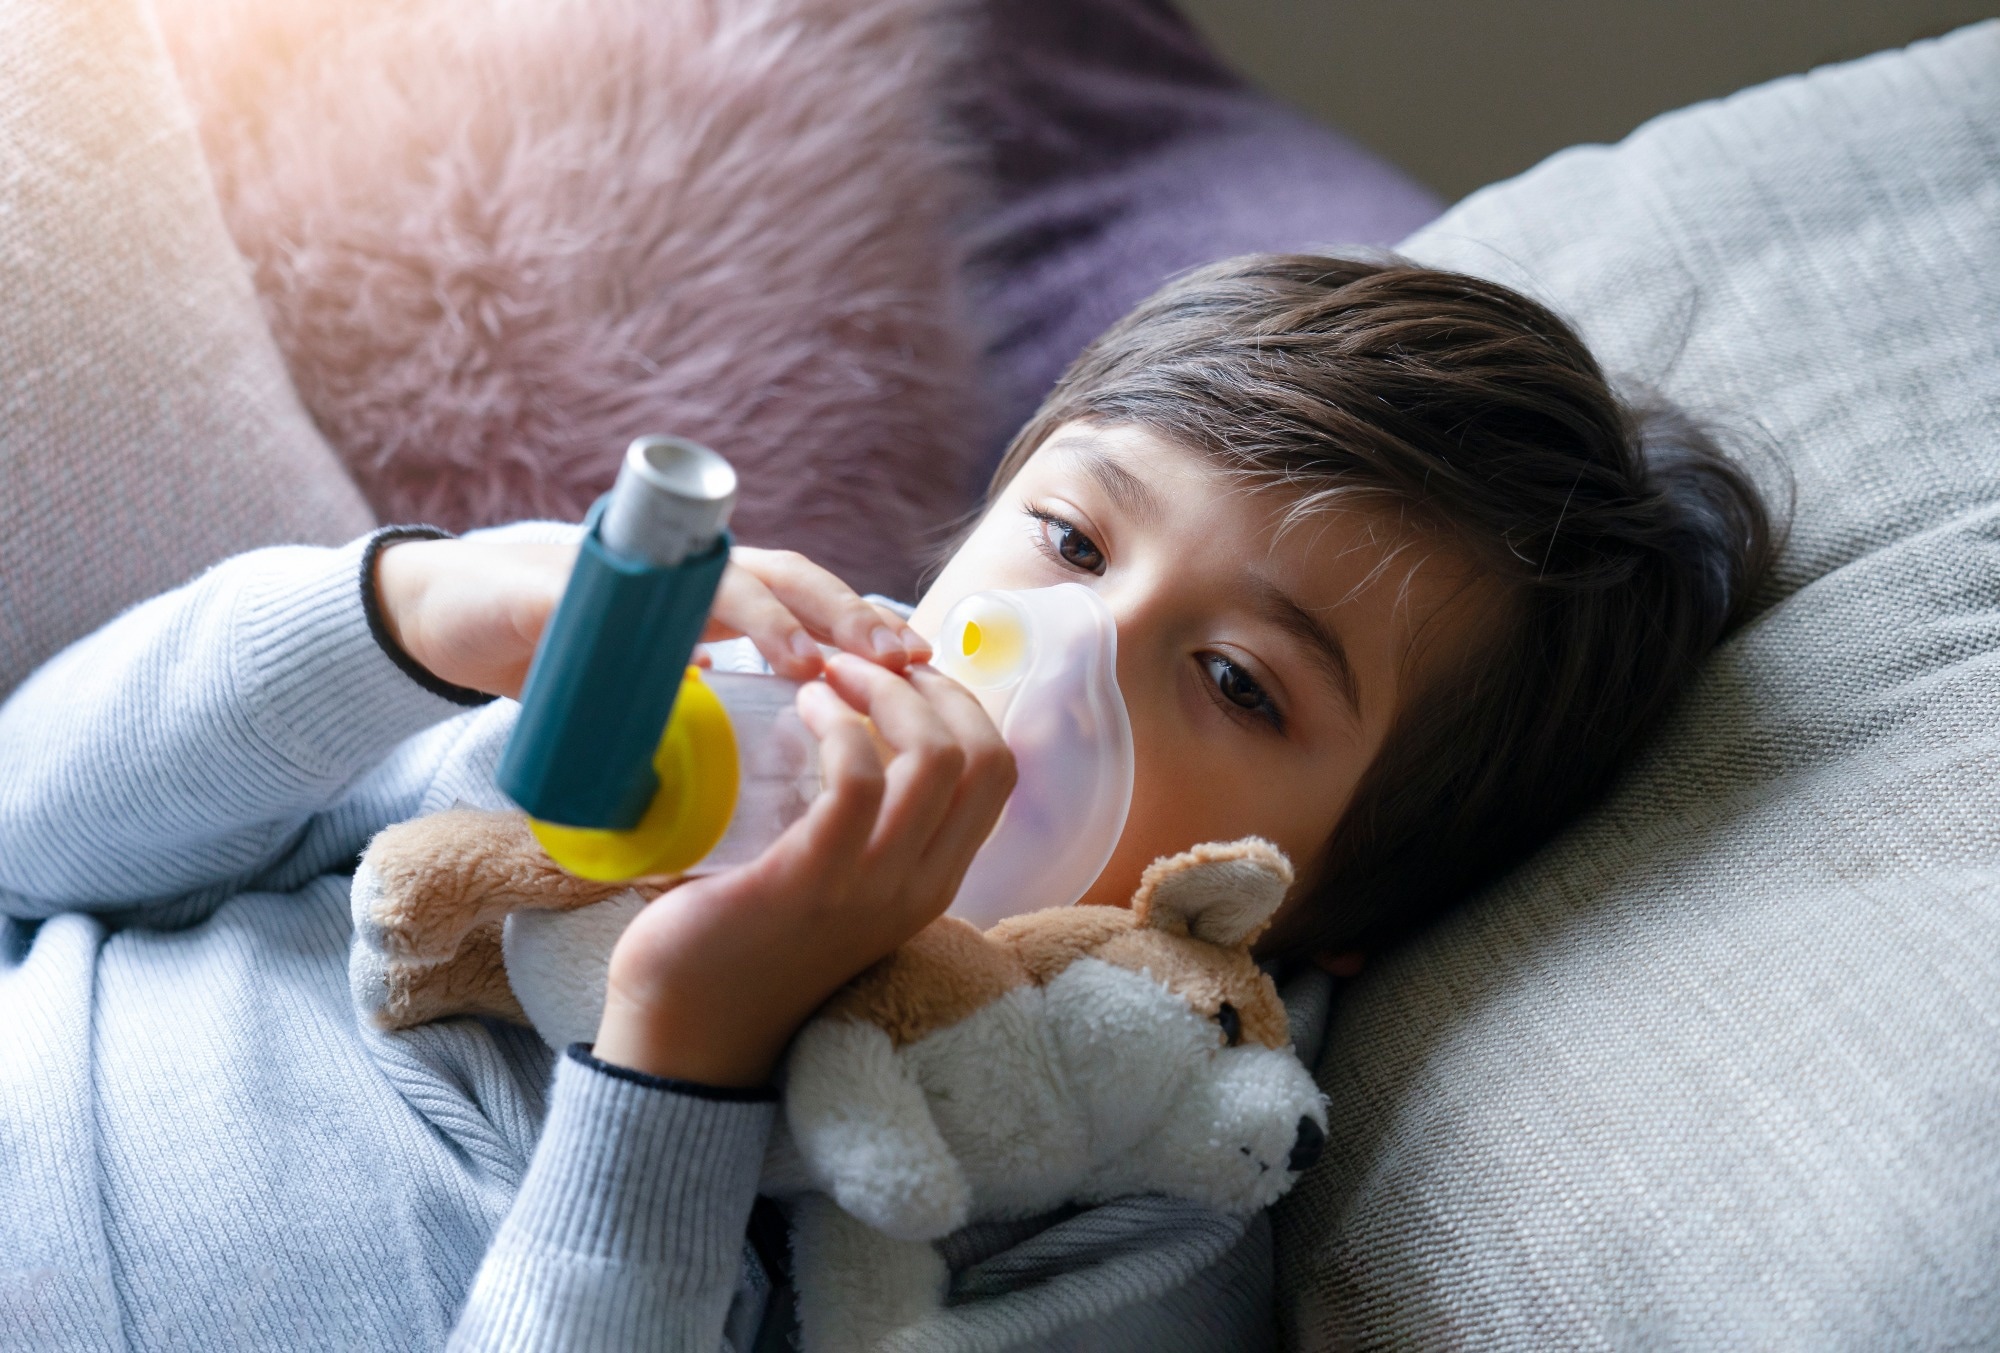 Study: Early-Life Exposure to Air Pollution and Childhood Asthma Cumulative Incidence in the ECHO CREW Consortium. Image Credit: Ann in the UK / Shutterstock